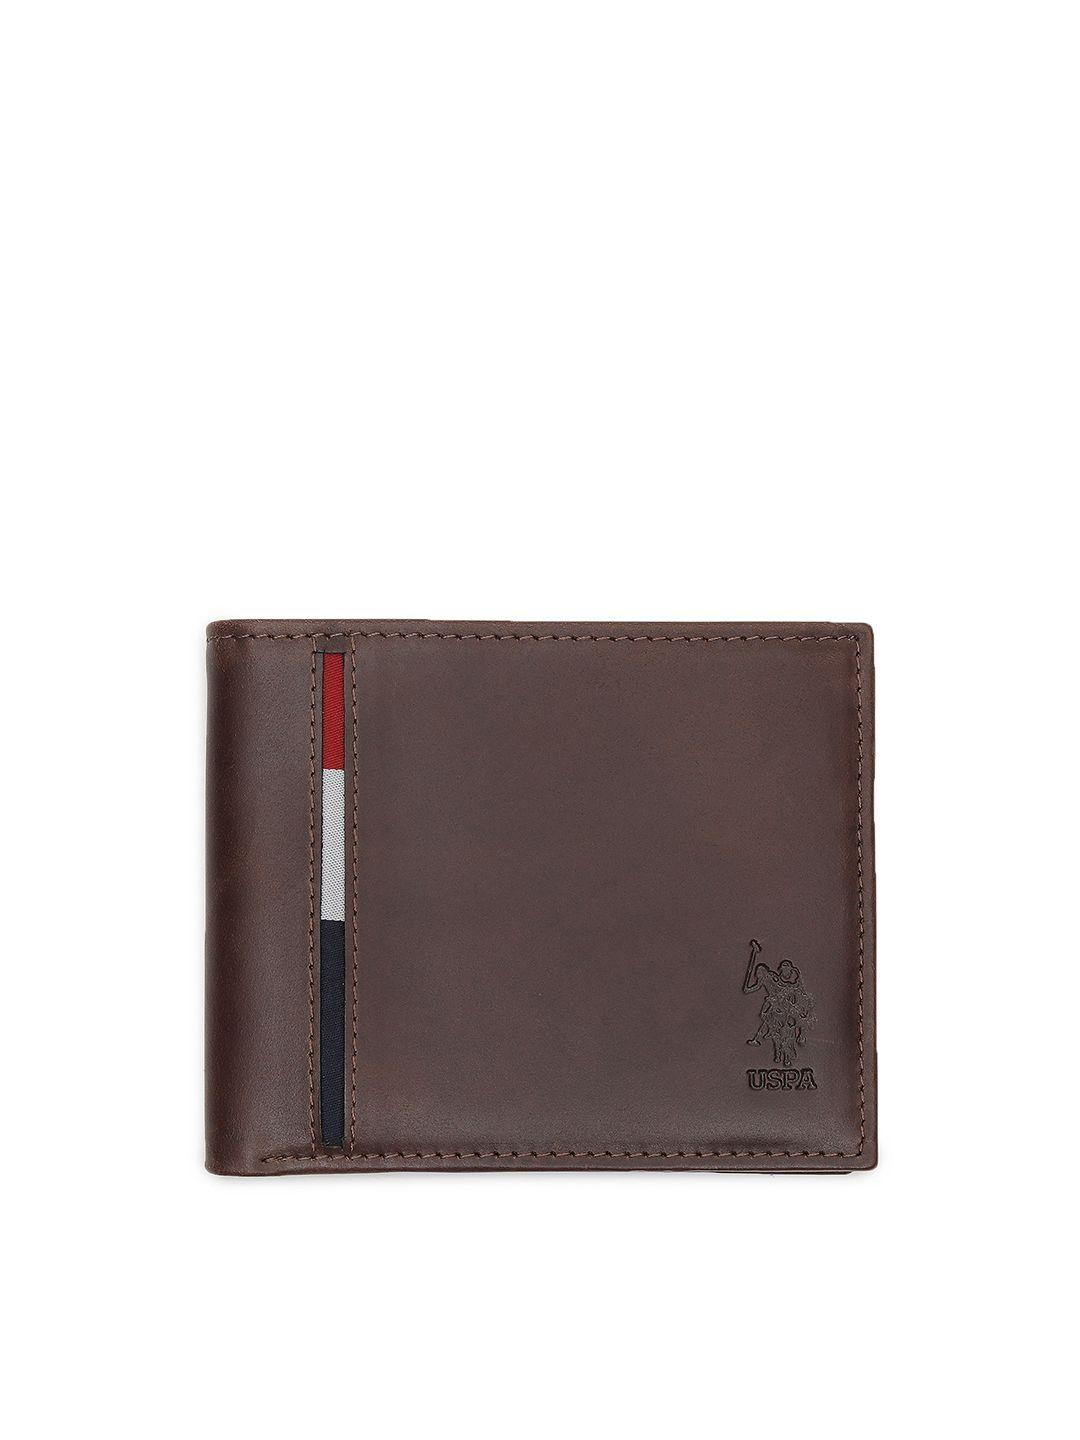 u s polo assn men brown leather two fold wallet